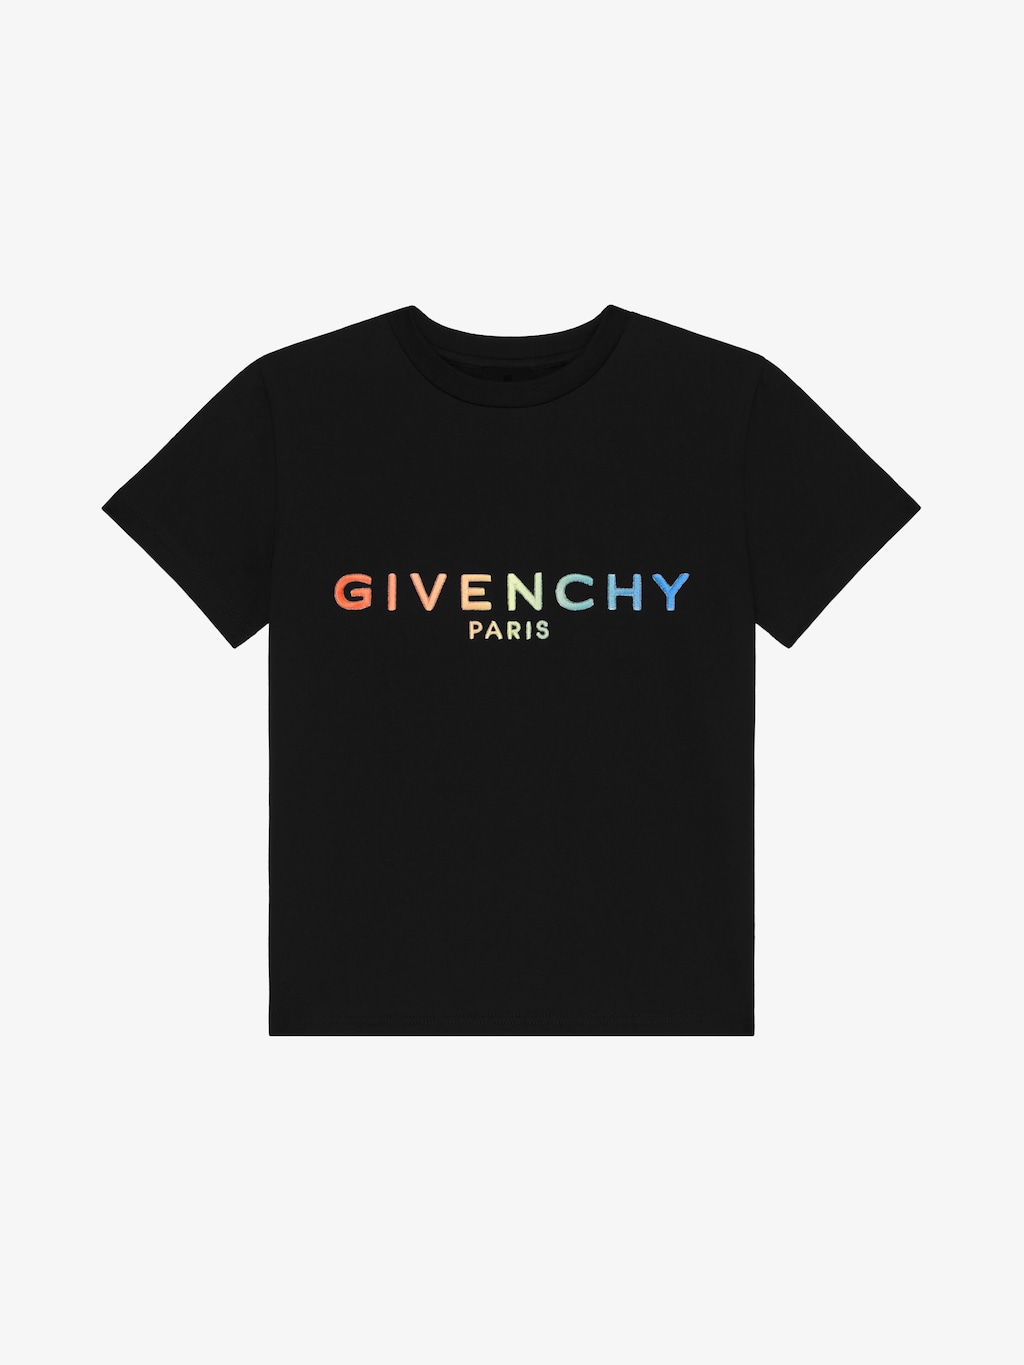 givenchy.com | T-shirt in embroidered jersey